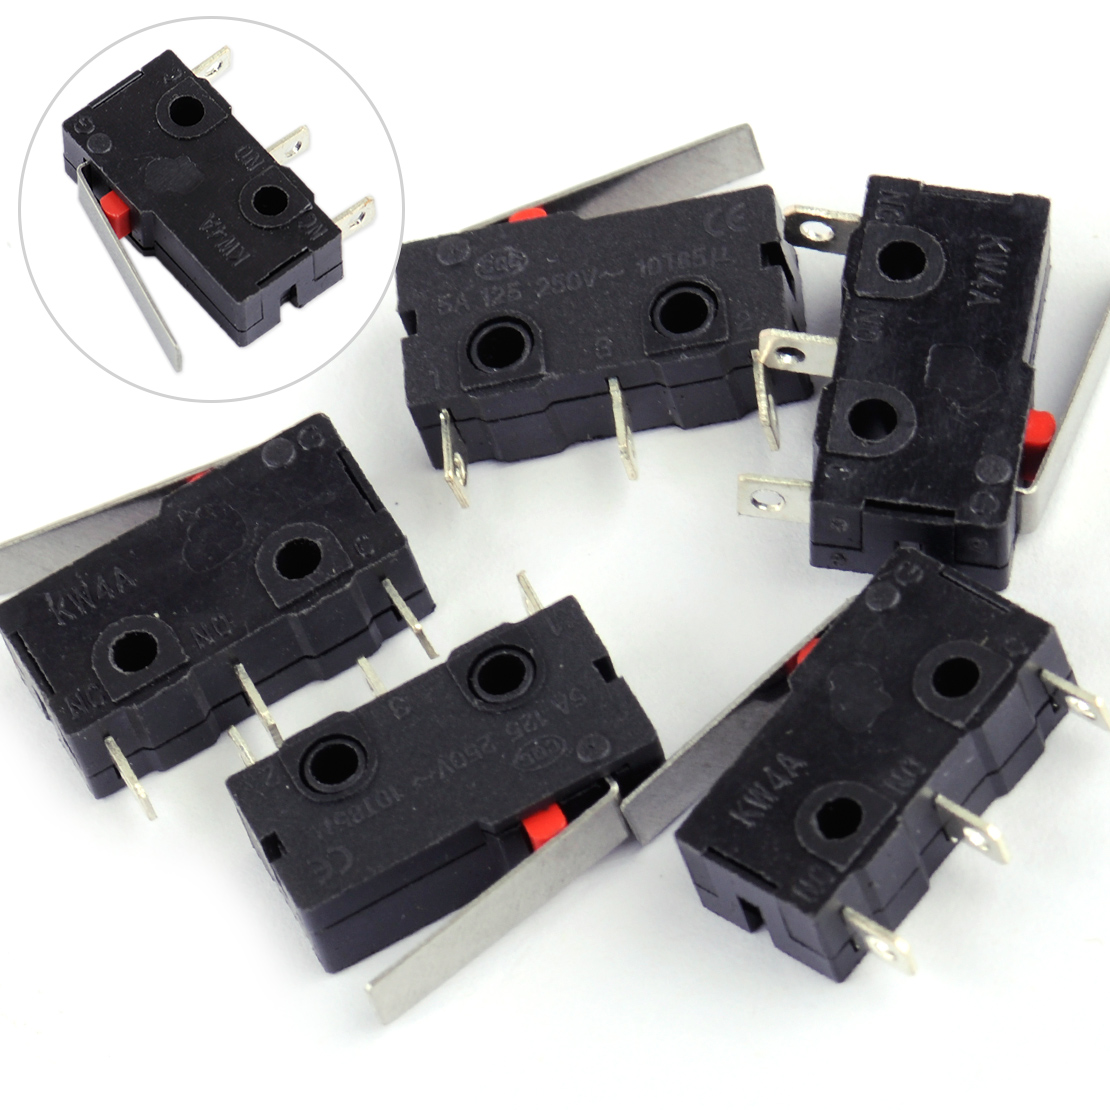 5x Momentary Micro Limit Switch AC DC 125V 5A KW4-3Z-3 For Mill CNC Hinge Lever